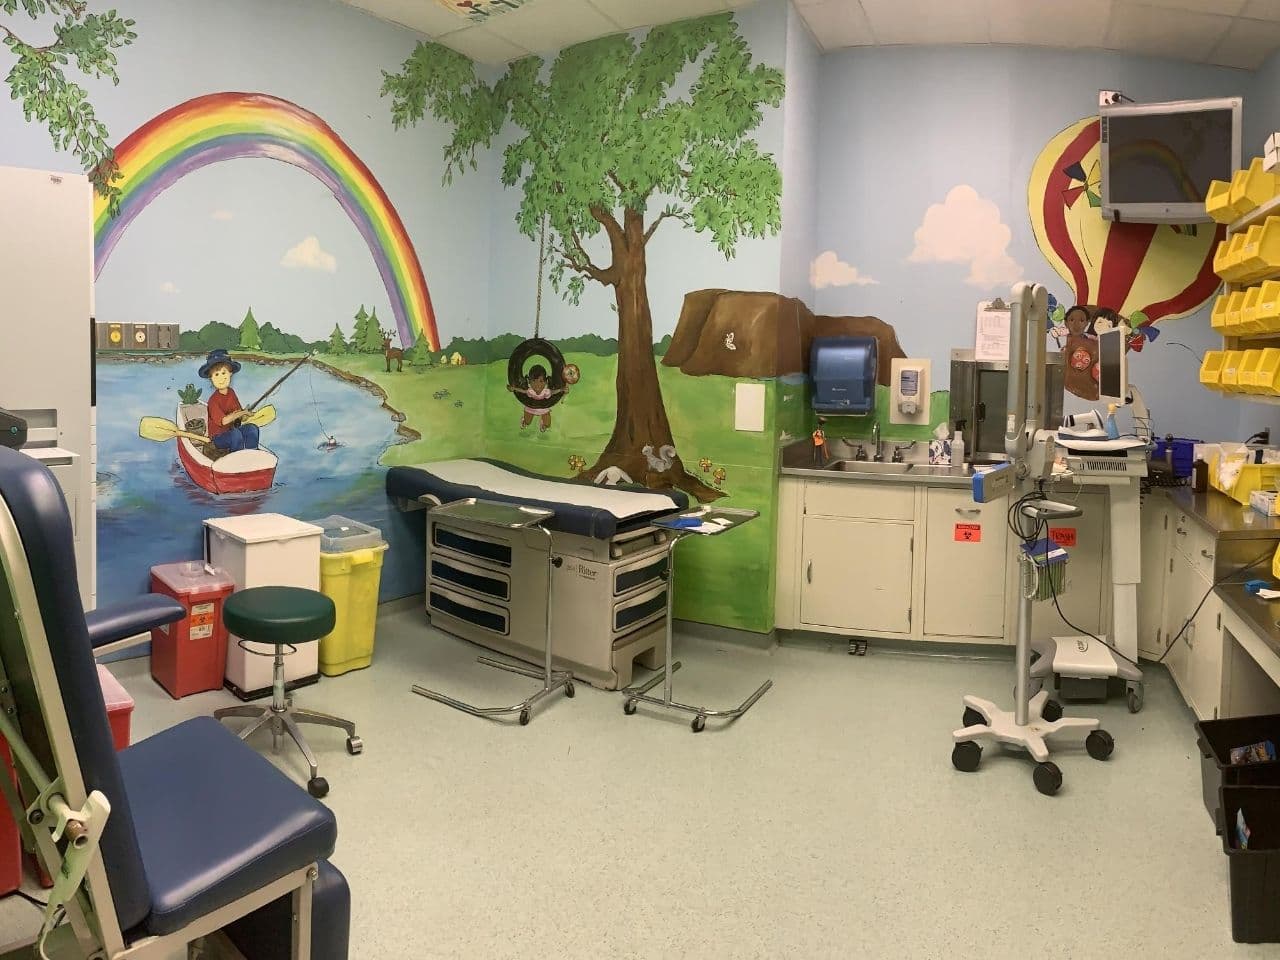 A procedure room has an exam table, chairs, counter space with sink, storage bins and is decorated with a full size wall mural showing a man fishing under a rainbow and a tree with a tire swing.